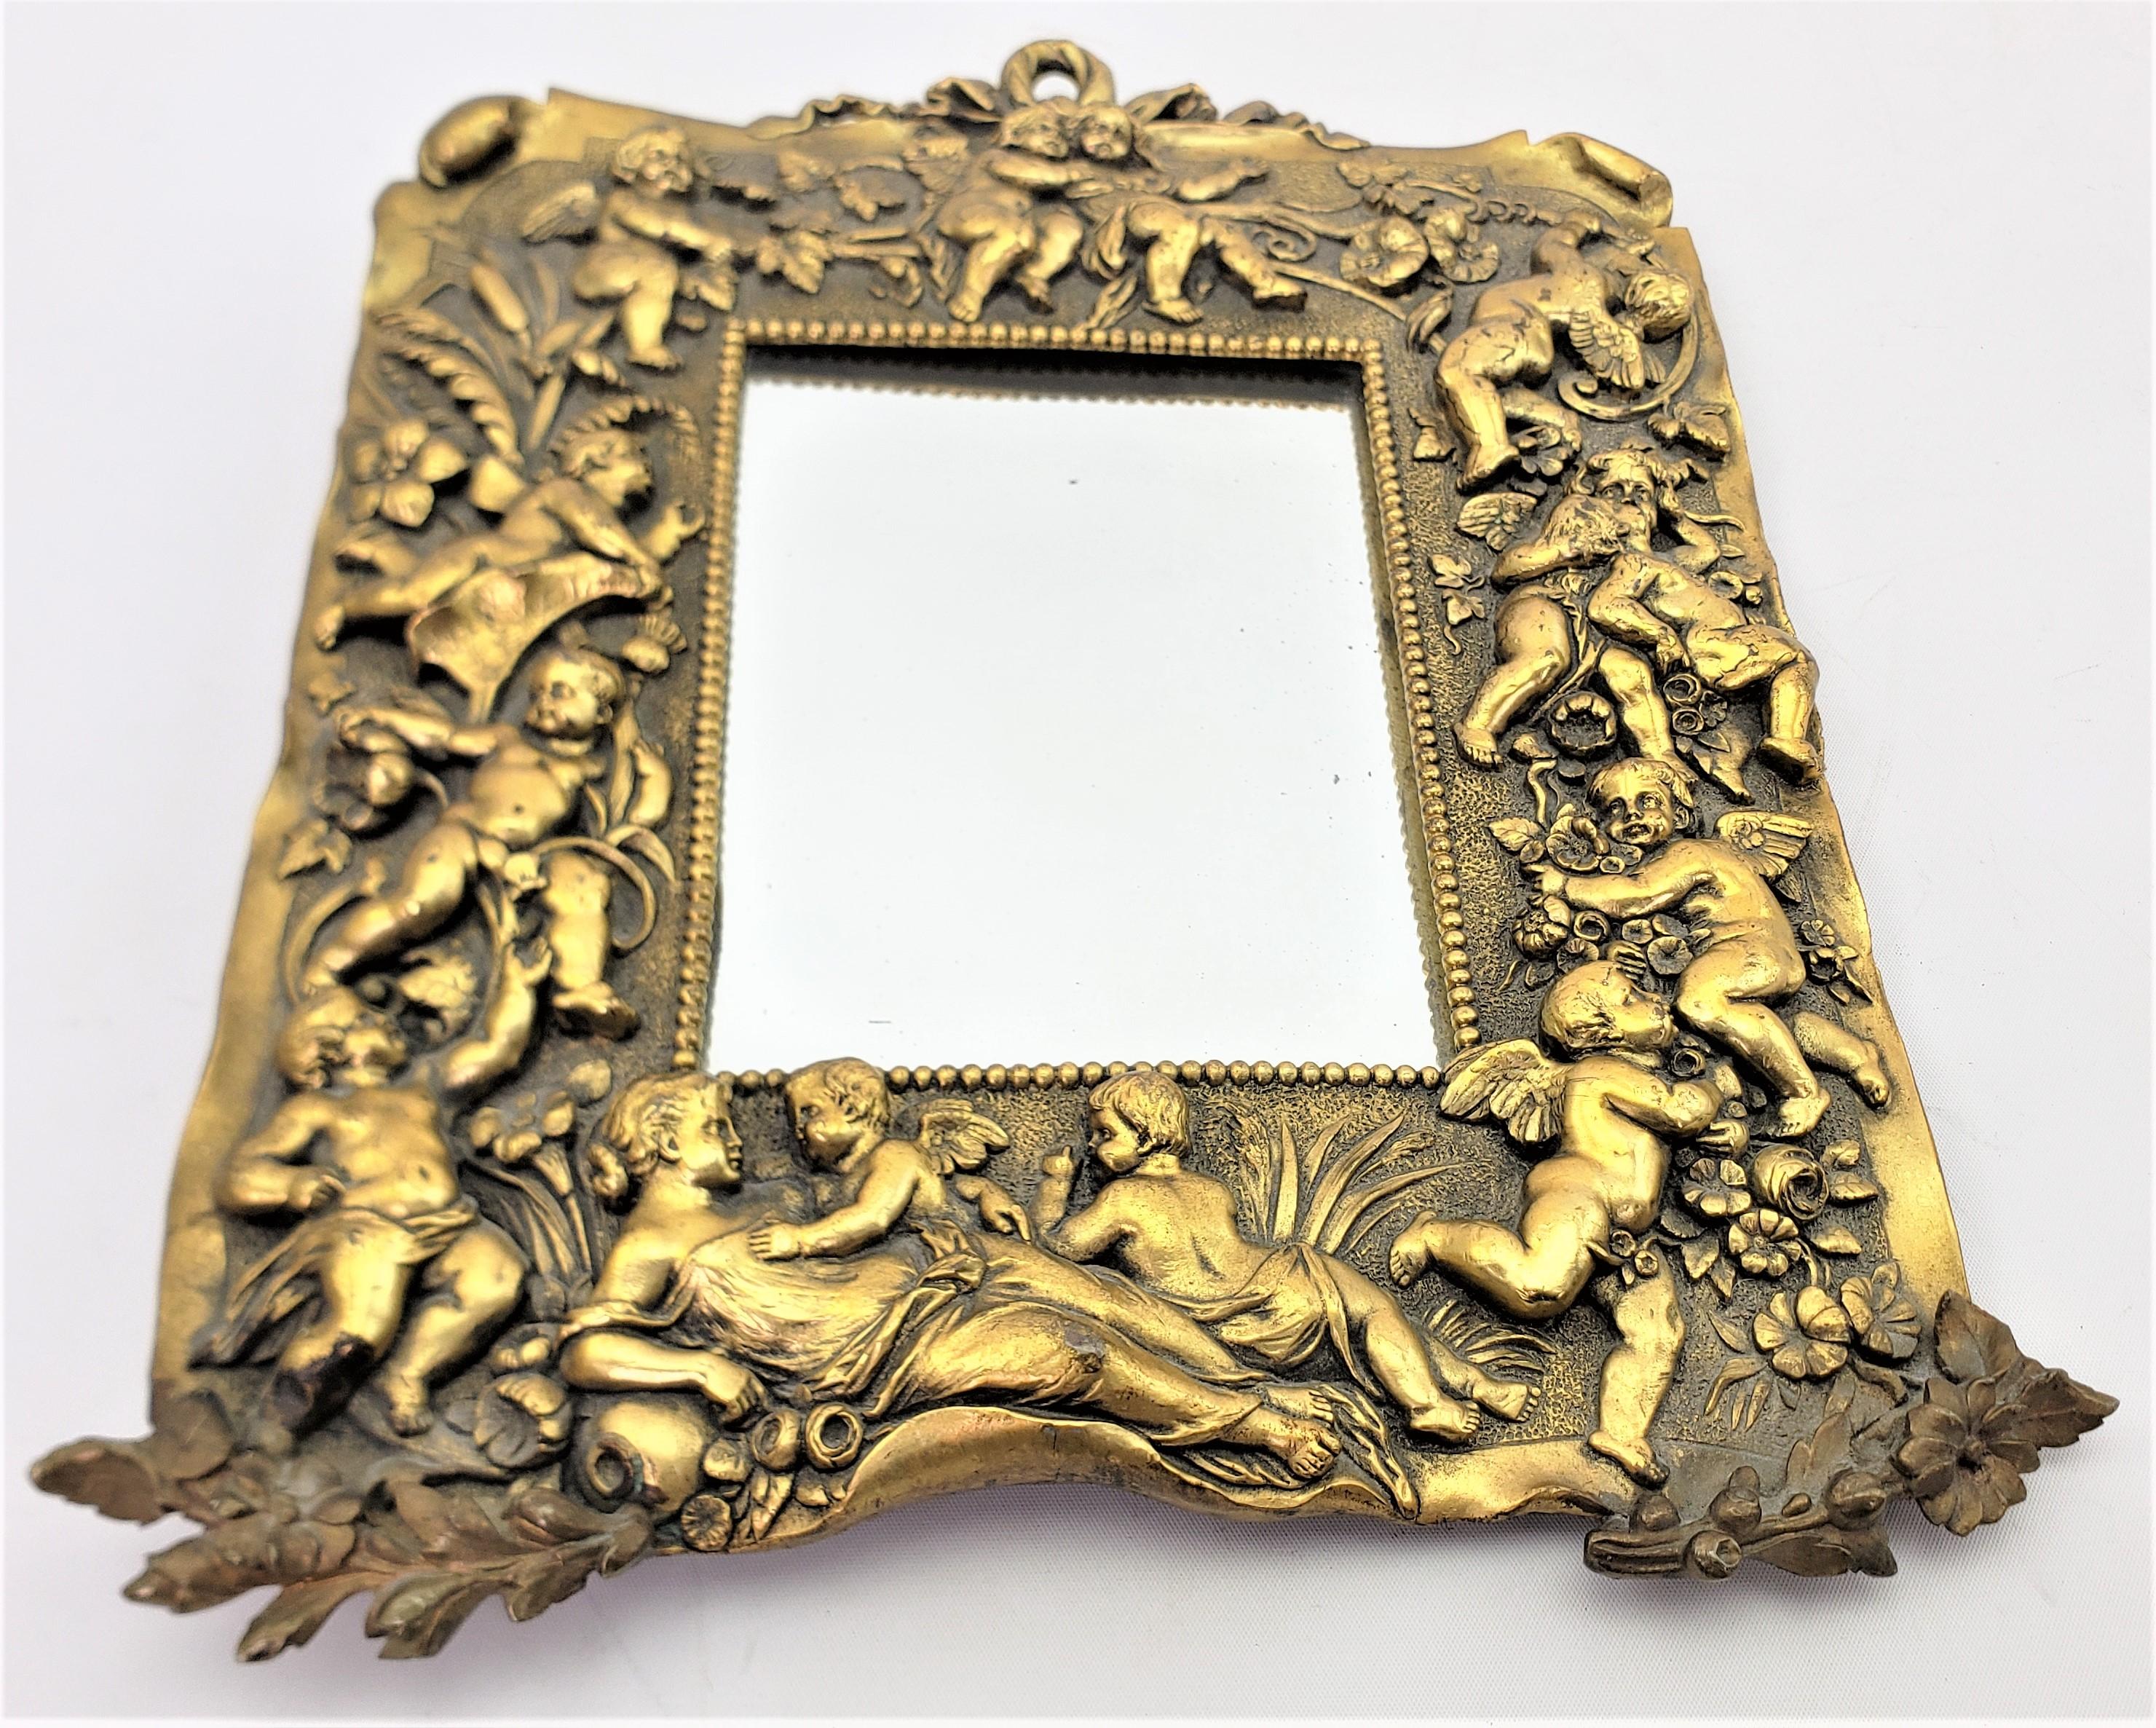 Antique Cast Bronze Table Mirror or Picture Frame with Cherubs & Floral Motif For Sale 1